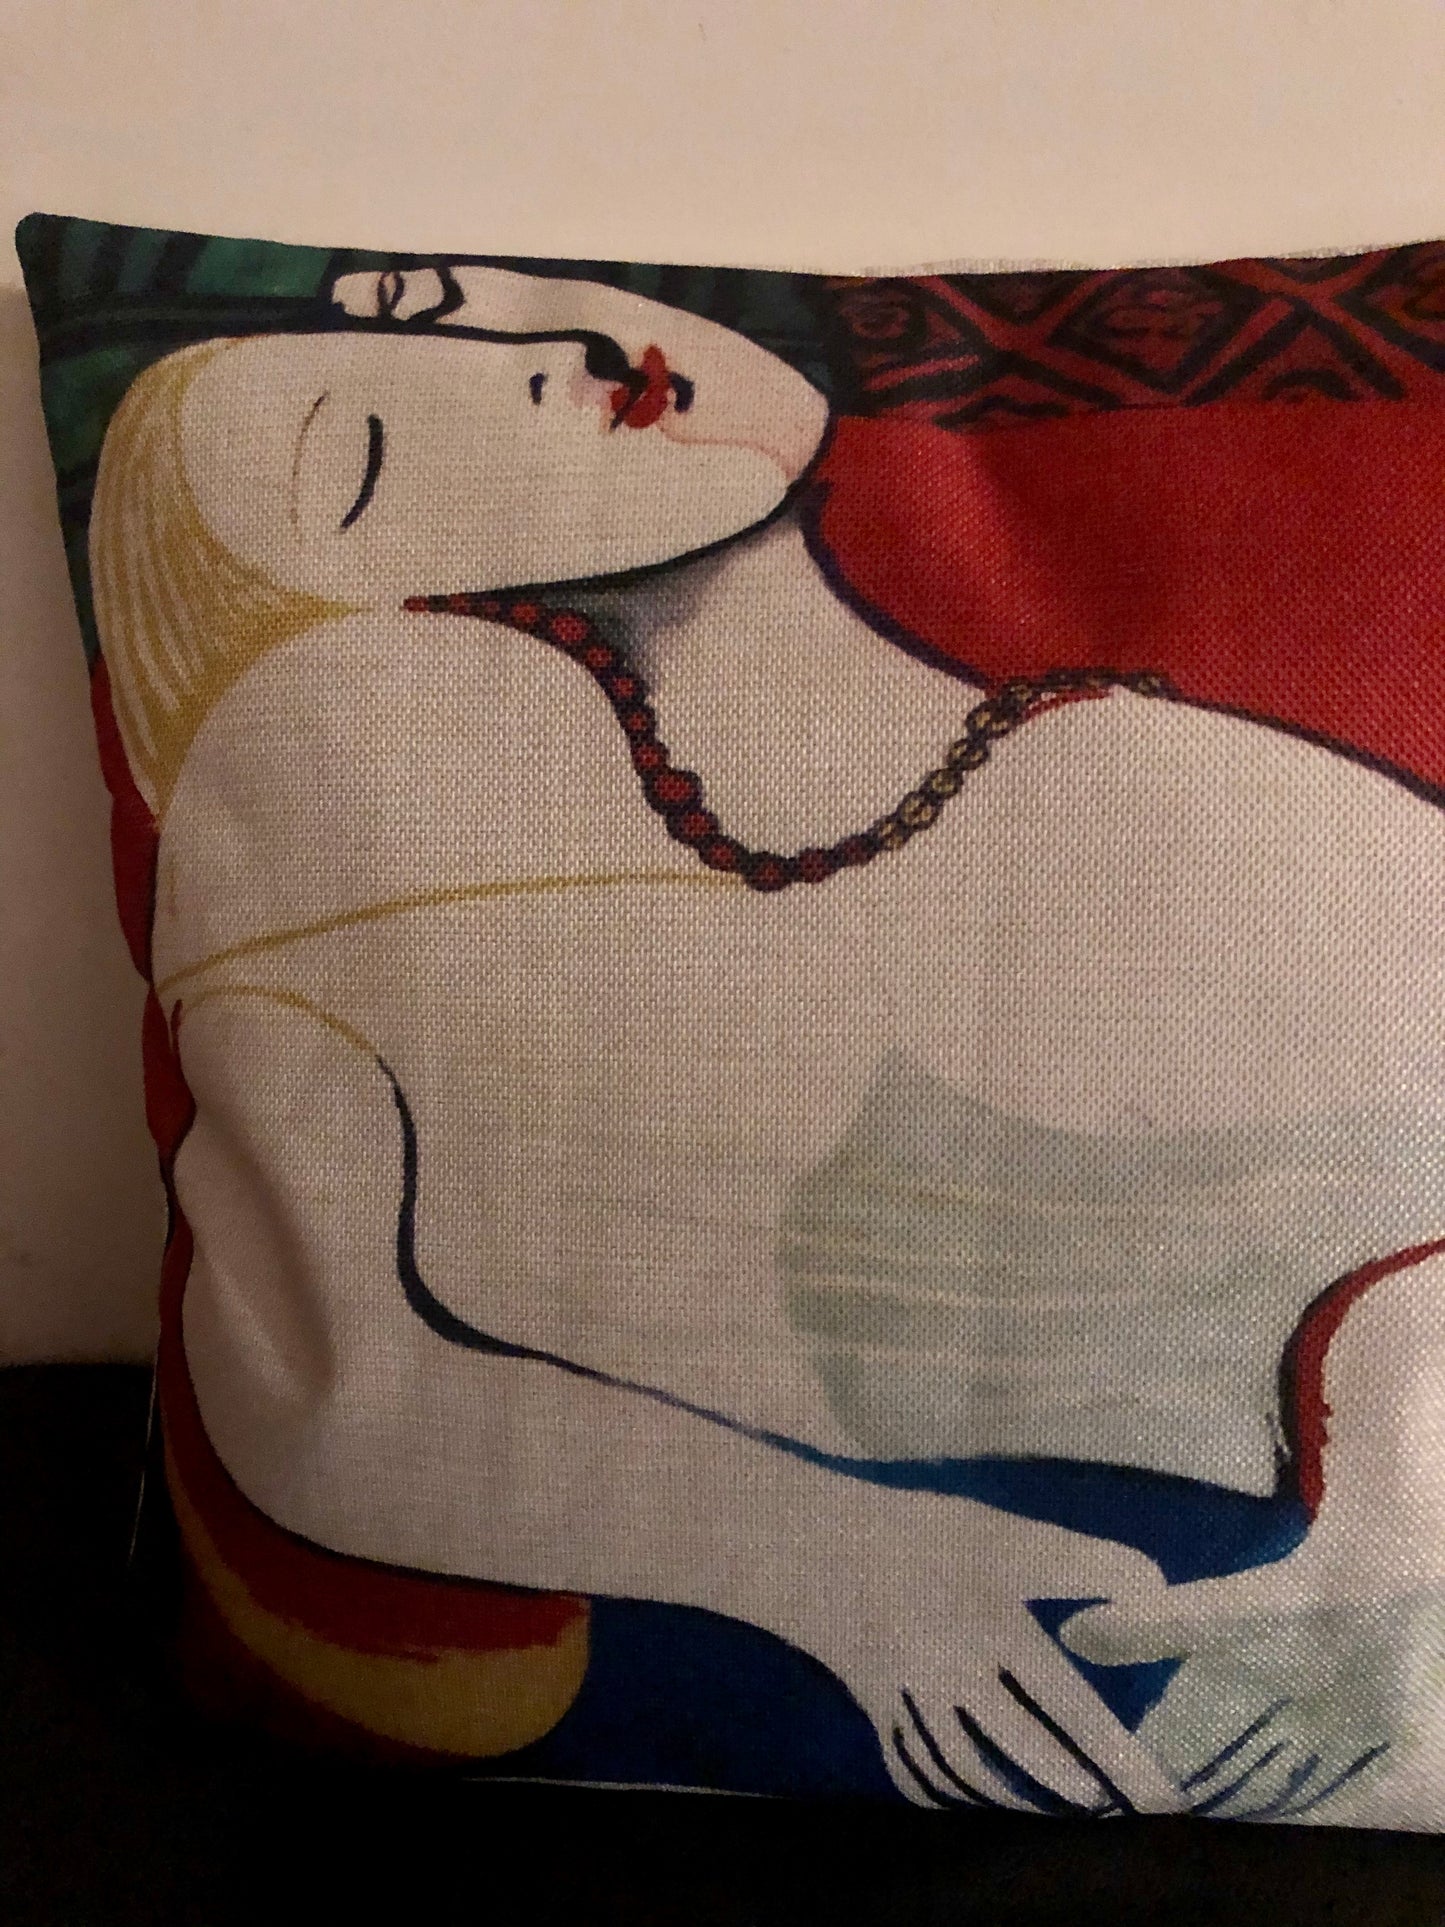 PABLO PICASSO - SLEEPING WOMAN - PILLOW COVER